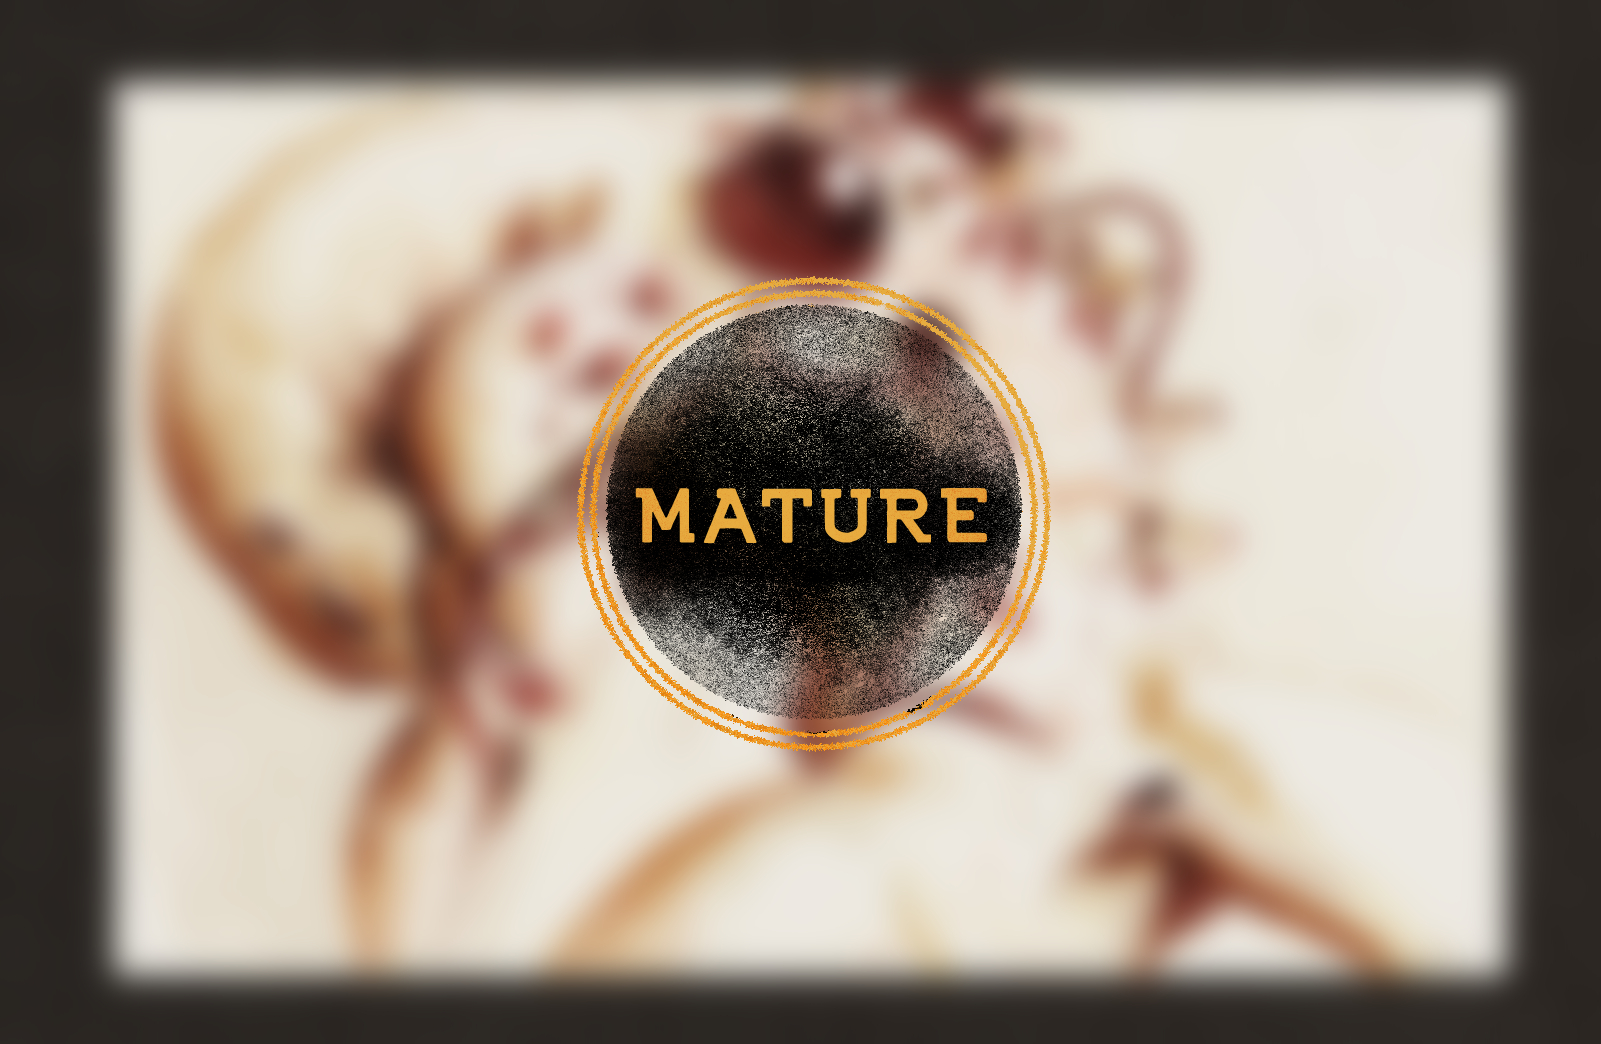 Blurred image with a label that reads 'Mature'.